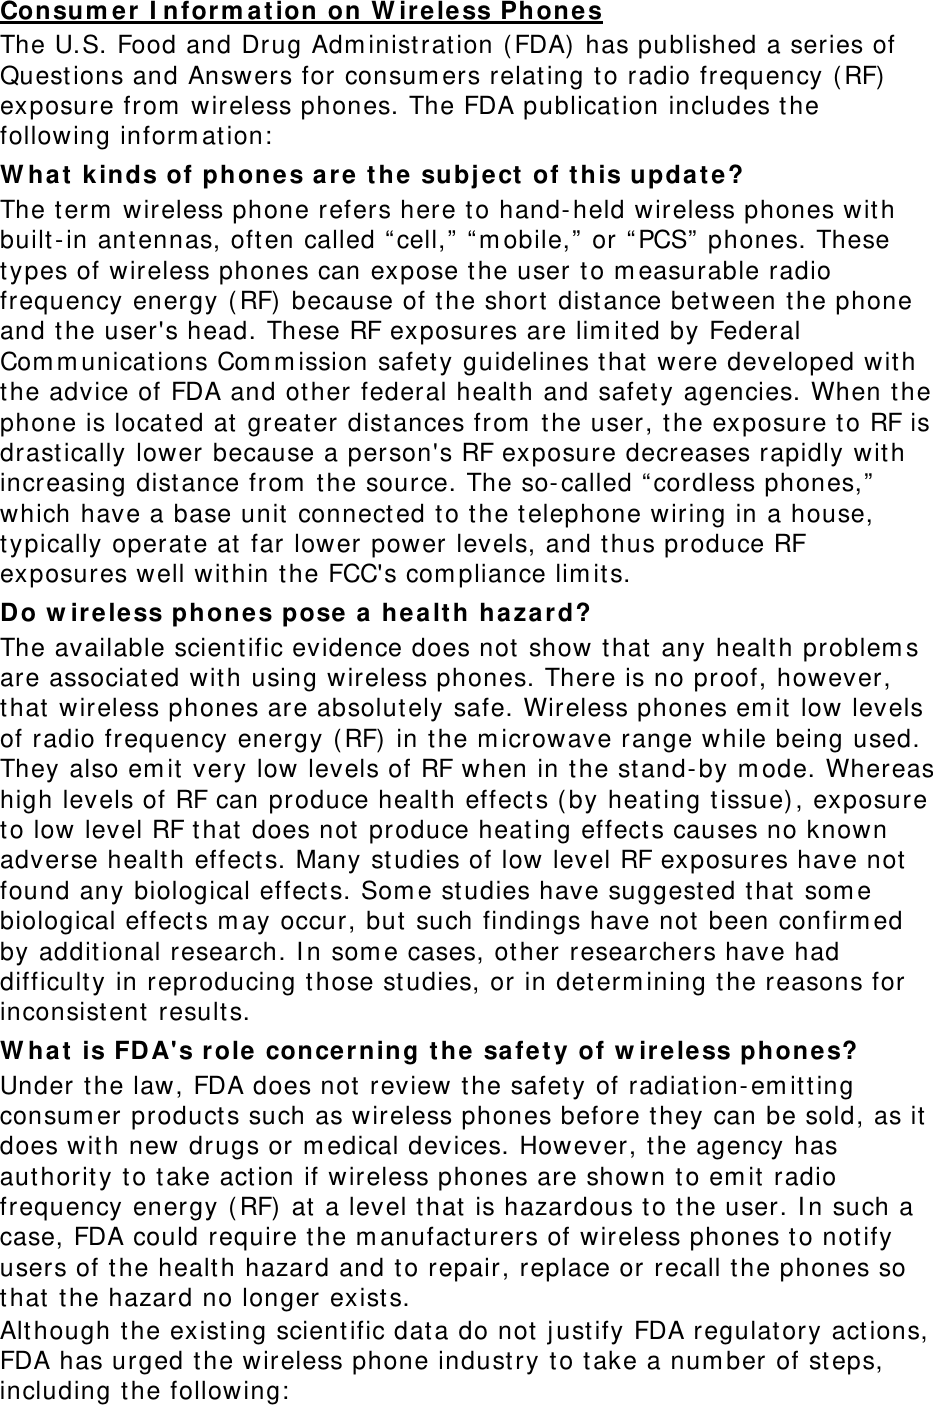 Consum er I nfor m at ion  on W ir e le ss Phones The U.S. Food and Drug Adm inist ration ( FDA)  has published a series of Quest ions and Answers for consum ers relat ing to radio frequency ( RF)  exposure from  wireless phones. The FDA publicat ion includes t he following inform at ion:  W hat k inds of phones a re t he subject  of t his update? The t erm  wireless phone refers here to hand- held wireless phones with built- in antennas, oft en called “cell,” “ m obile,” or “ PCS”  phones. These types of wireless phones can expose t he user t o m easurable radio frequency energy ( RF)  because of t he short dist ance bet ween t he phone and t he user&apos;s head. These RF exposures are lim ited by Federal Com m unicat ions Com m ission safet y guidelines t hat  were developed with the advice of FDA and other federal health and safet y agencies. When the phone is locat ed at greater dist ances from  t he user, the exposure t o RF is drast ically lower because a person&apos;s RF exposure decreases rapidly with increasing dist ance from  the source. The so- called “ cordless phones,” which have a base unit  connect ed t o the telephone wiring in a house, typically operat e at far lower power levels, and t hus produce RF exposures well wit hin the FCC&apos;s com pliance lim it s. Do w ireless phones pose  a  healt h hazard? The available scientific evidence does not show t hat  any healt h problem s are associat ed wit h using wireless phones. There is no proof, however, that  wireless phones are absolut ely safe. Wireless phones em it  low levels of radio frequency energy ( RF)  in t he m icrowave range while being used. They also em it  very low levels of RF when in the st and- by m ode. Whereas high levels of RF can produce healt h effect s (by heating t issue) , exposure to low level RF t hat  does not  produce heating effects causes no known adverse healt h effects. Many studies of low level RF exposures have not  found any biological effect s. Som e st udies have suggested t hat  som e biological effect s m ay occur, but  such findings have not been confirm ed by additional research. I n som e cases, ot her researchers have had difficulty in reproducing t hose st udies, or in det erm ining t he reasons for inconsist ent result s. W hat is FDA&apos;s role con cerning t he safety of w irele ss phone s? Under t he law, FDA does not  review t he safet y of radiat ion- em it ting consum er product s such as wireless phones before t hey can be sold, as it  does wit h new drugs or m edical devices. However, t he agency has aut horit y t o t ake action if wireless phones are shown to em it  radio frequency energy ( RF)  at  a level t hat  is hazardous t o t he user. I n such a case, FDA could require t he m anufacturers of wireless phones t o not ify users of t he health hazard and t o repair, replace or recall t he phones so that  t he hazard no longer exist s. Although t he existing scientific dat a do not j ust ify FDA regulat ory act ions, FDA has urged t he wireless phone industry to take a num ber of st eps, including t he following:  